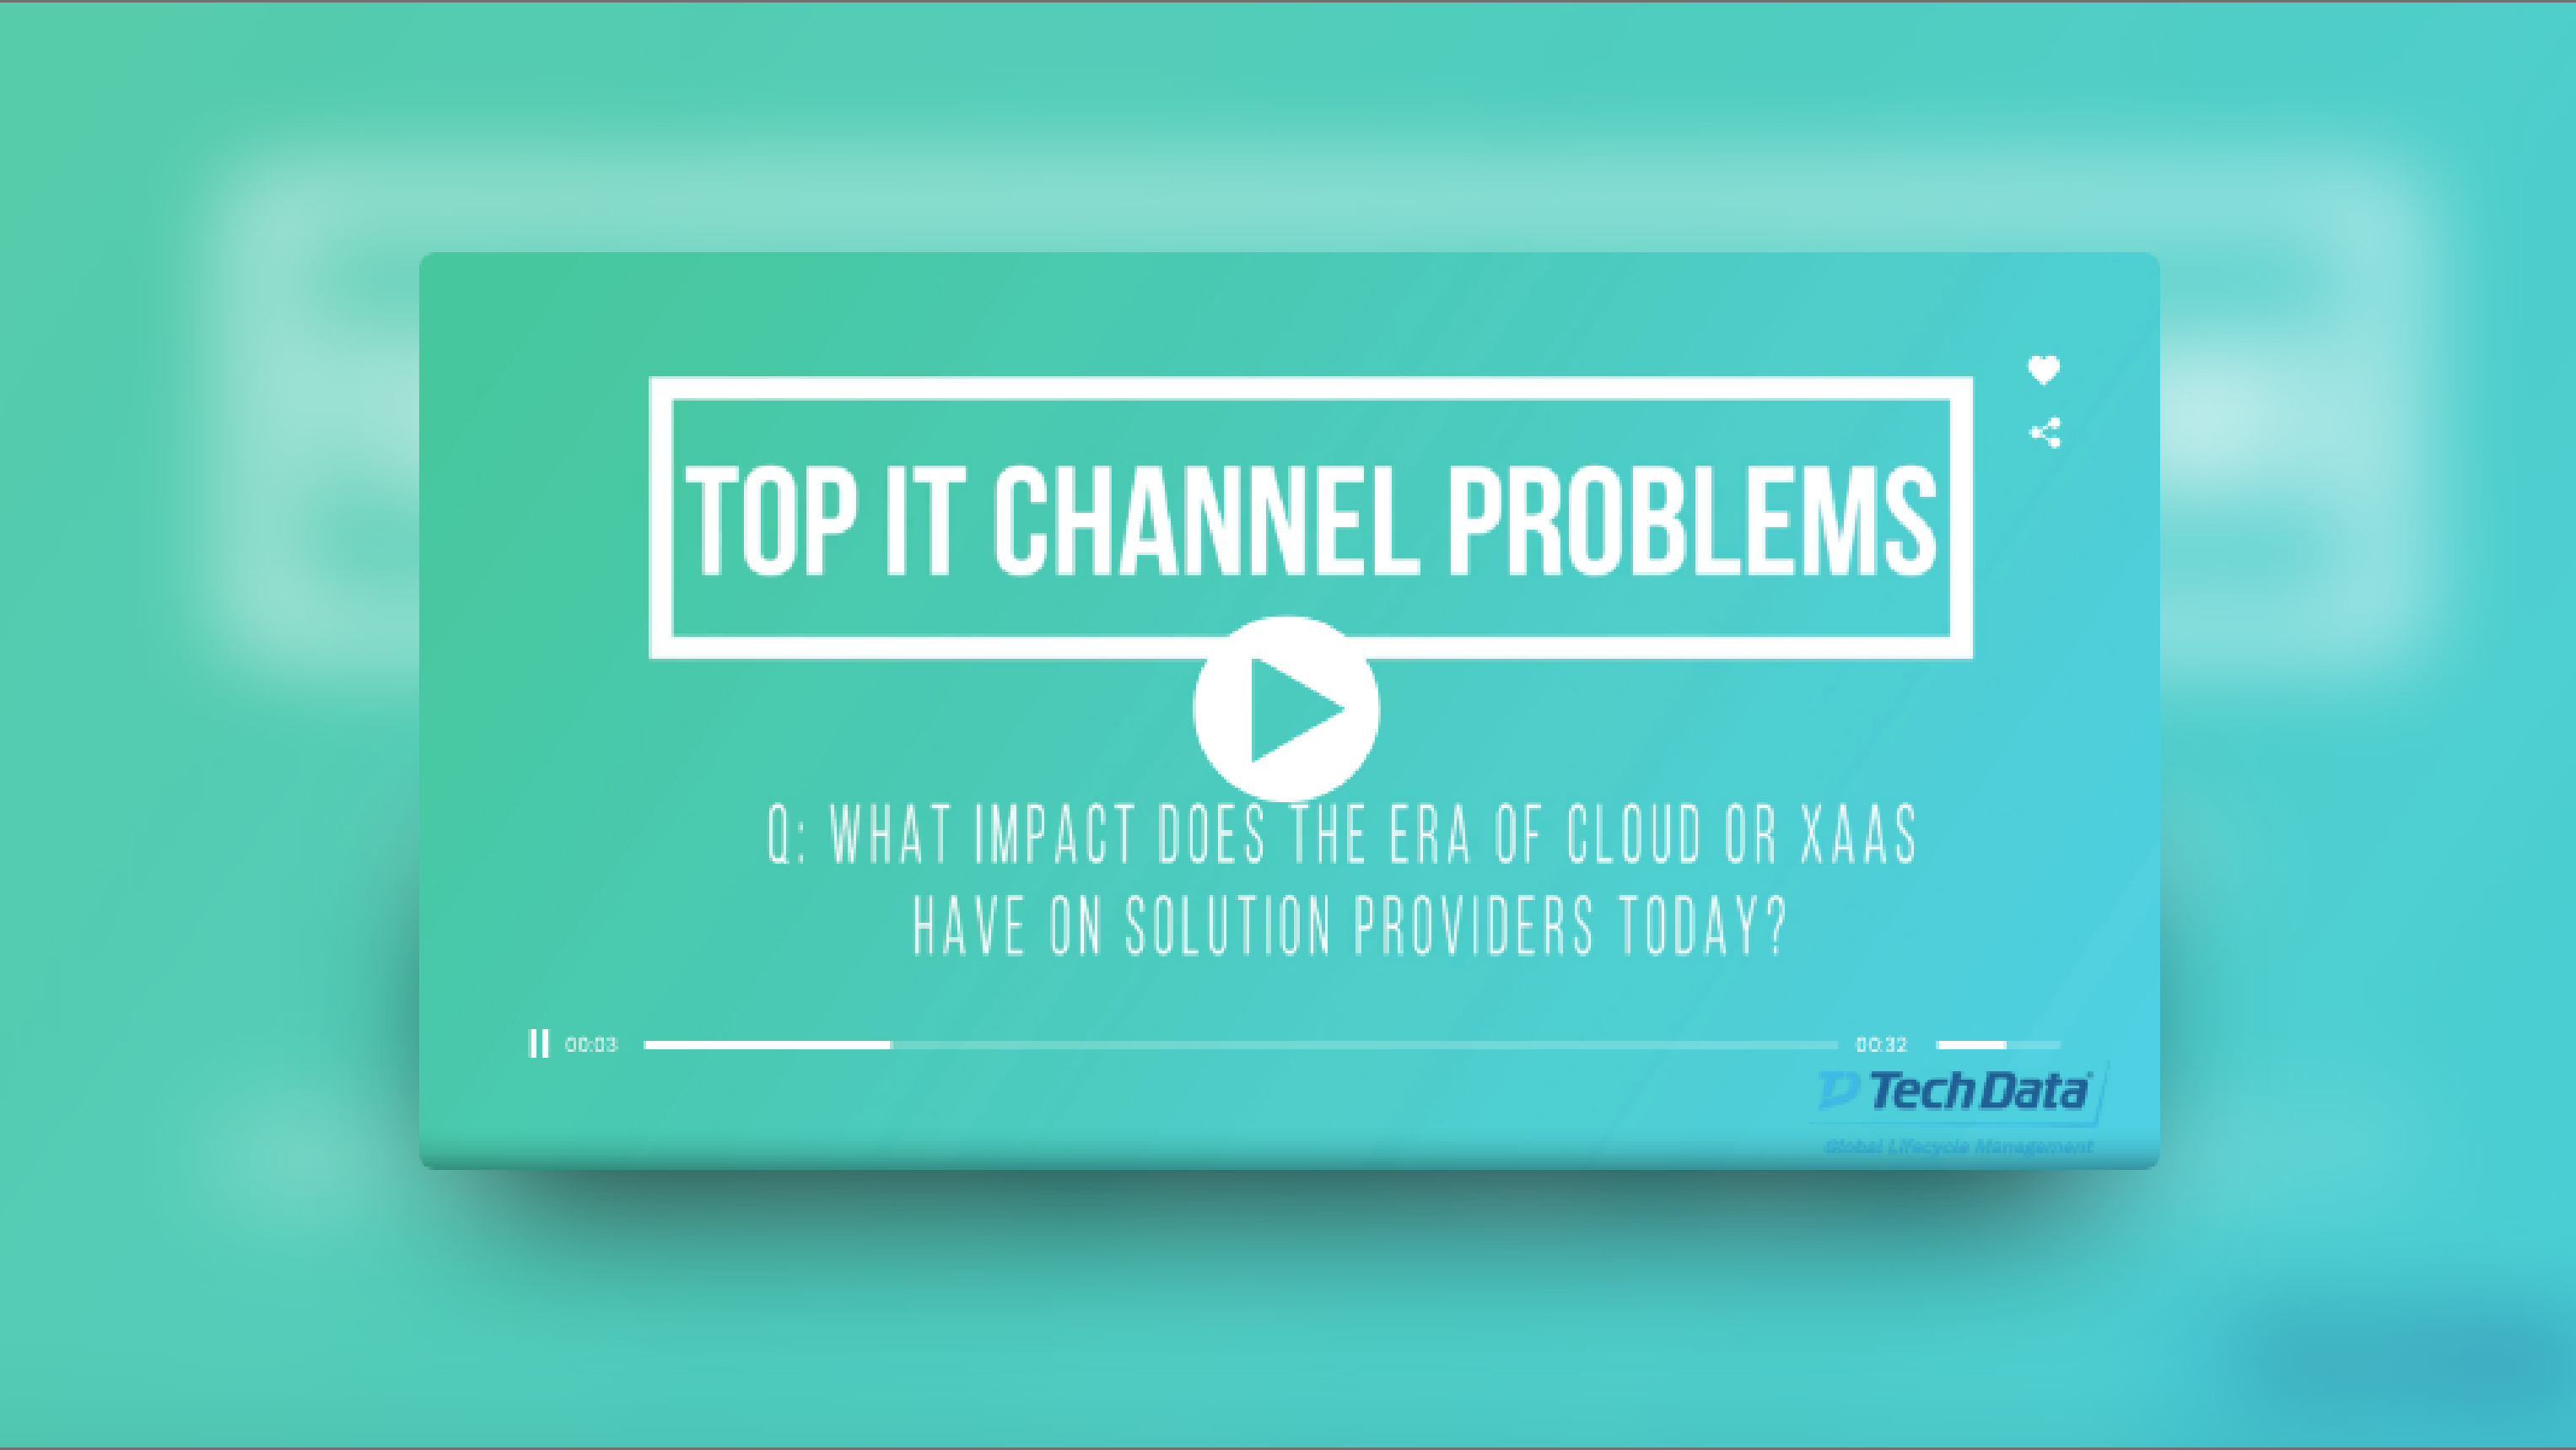 Top IT Channel Problems: Transformation